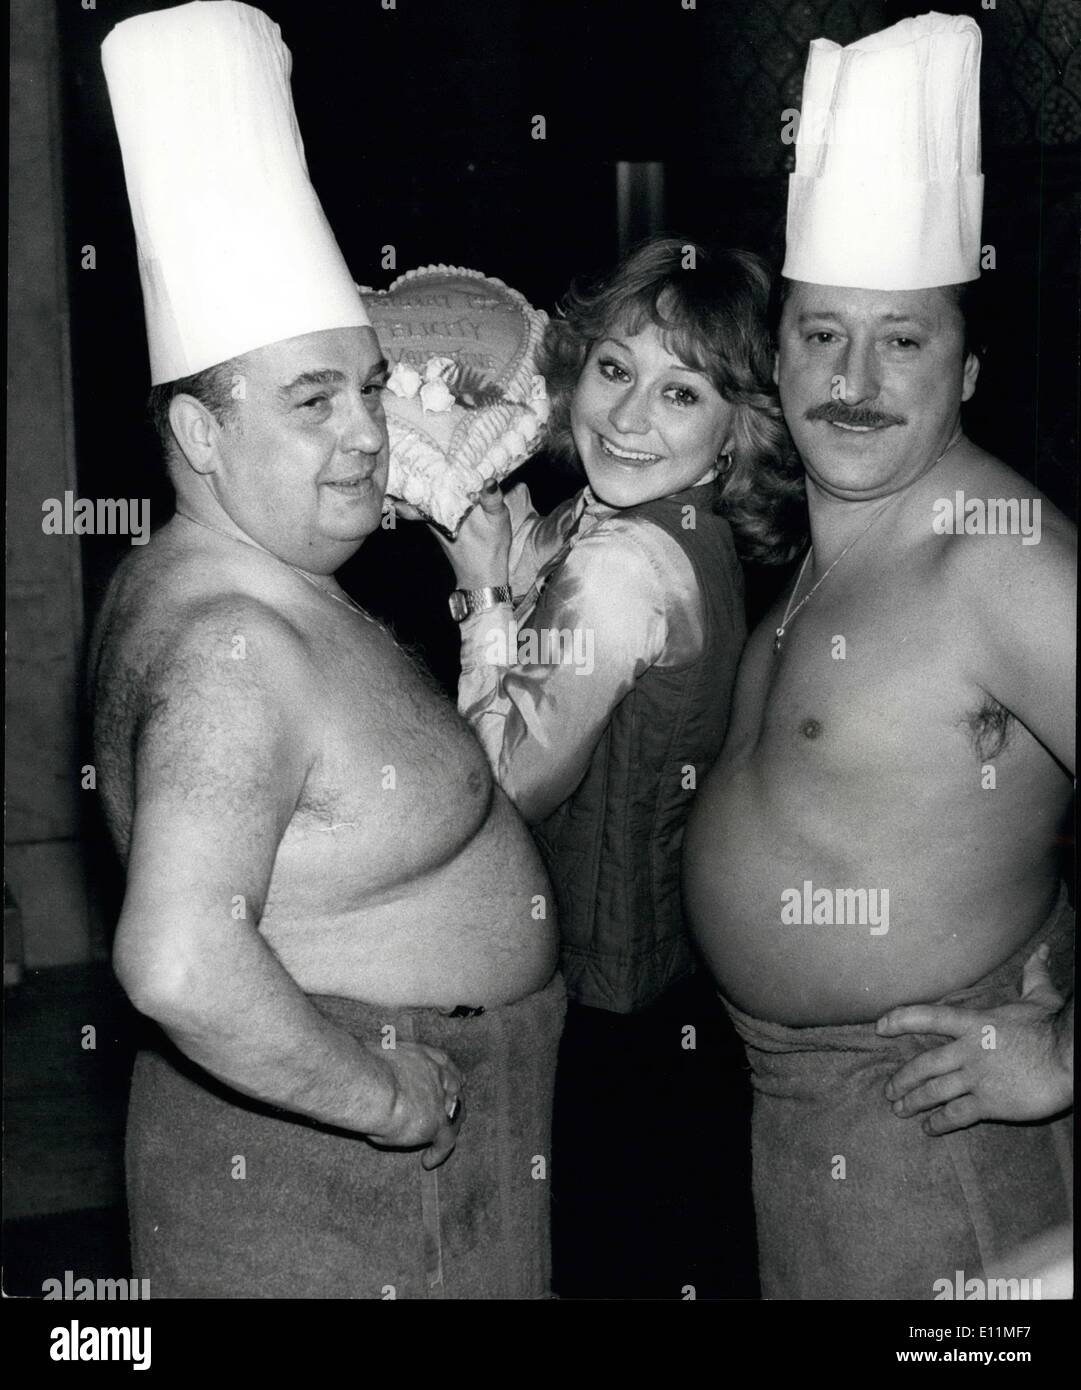 Feb. 02, 1979 - Good Life Star Felicity Kendall Visits Turkish Bath 'Good Life' Star Felicity Kendall, today made a visit the RAC club Turkish Bath in Pal Mall. To give special Valentine card and a message of encouragement to three overweight top London Chefs about to embark on the British Heart Foundation's fifth nationwide annual sponsored slimming campaign. And while losing weight they hope to raise money for heart research, Participants in last year's campaign raised over 46,000 Stock Photo